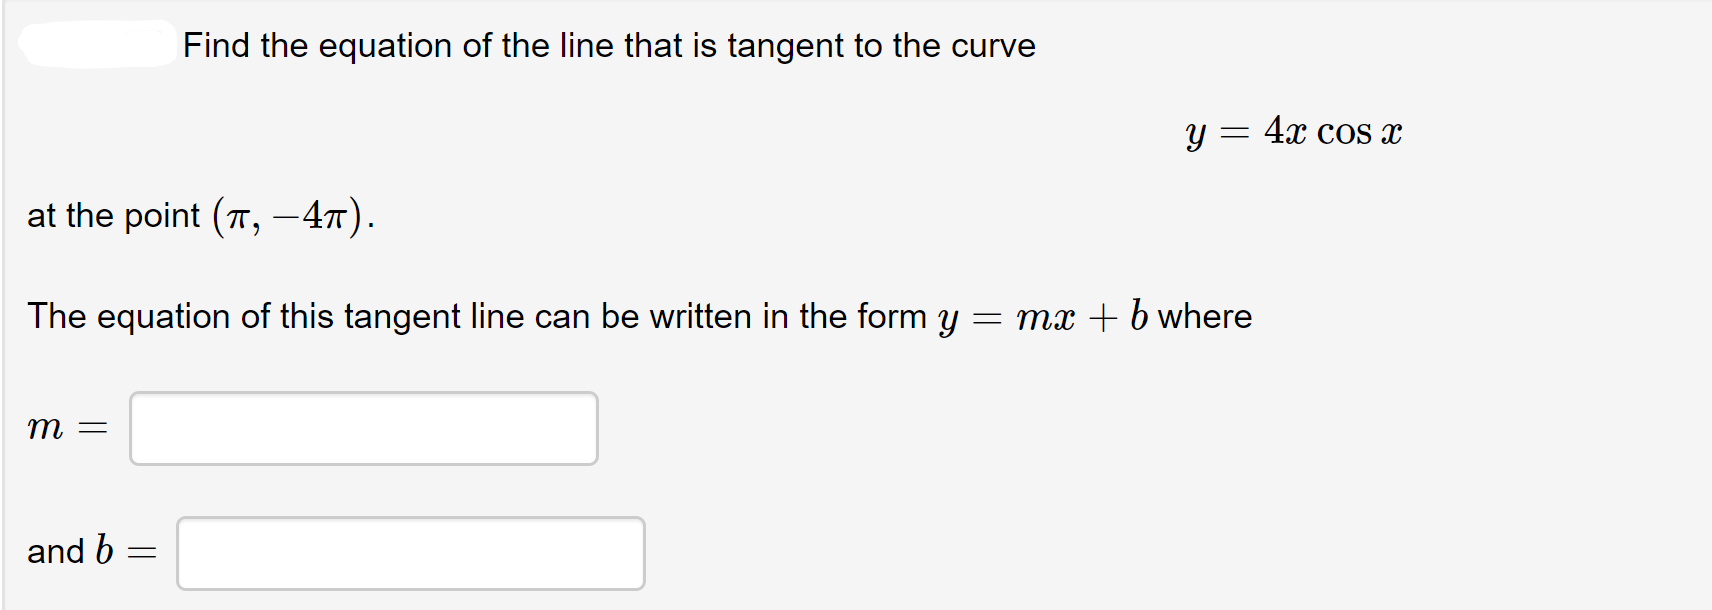 Find the equation of the line that is tangent to the curve
y = 4x cos x
at the point (T, -47).
The equation of this tangent line can be written in the form y = mx + b where
m =
and b
